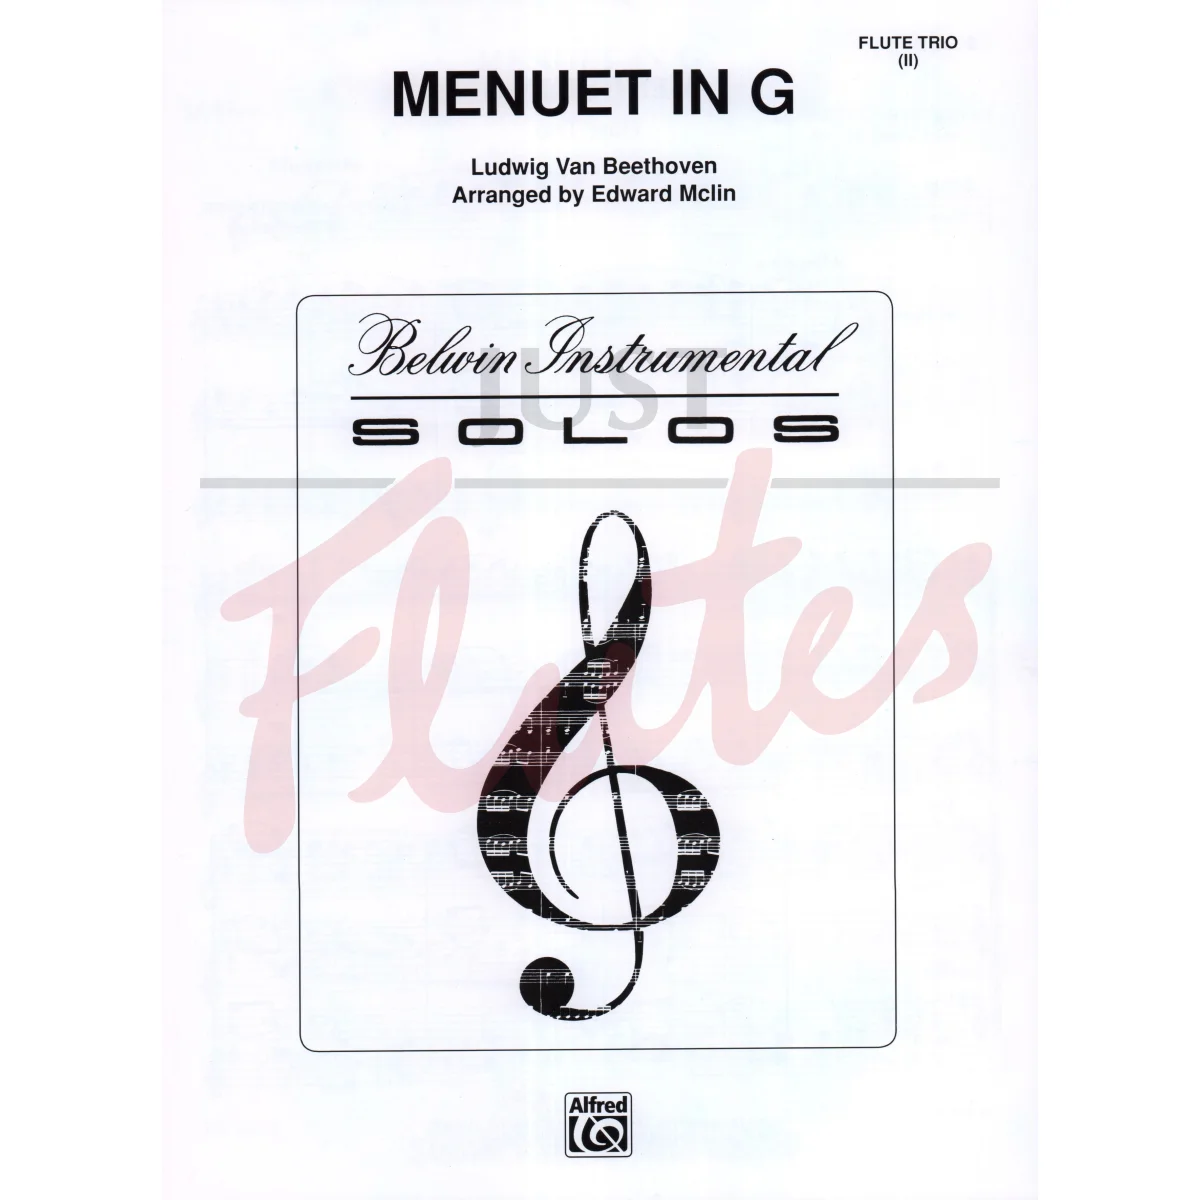 Menuet in G for Three Flutes